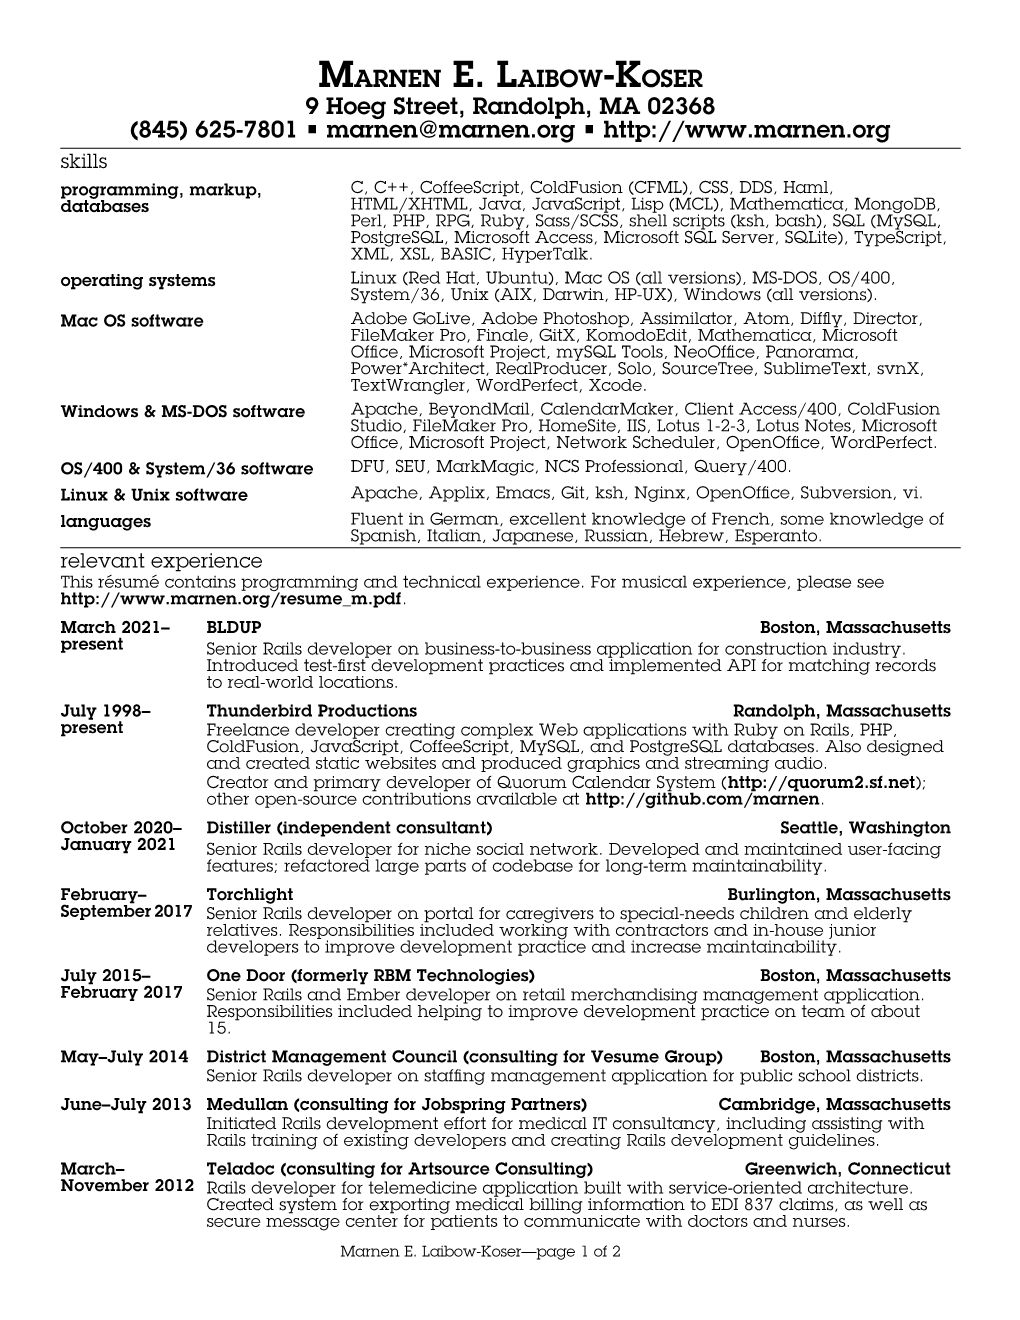 Résumé Contains Programming and Technical Experience